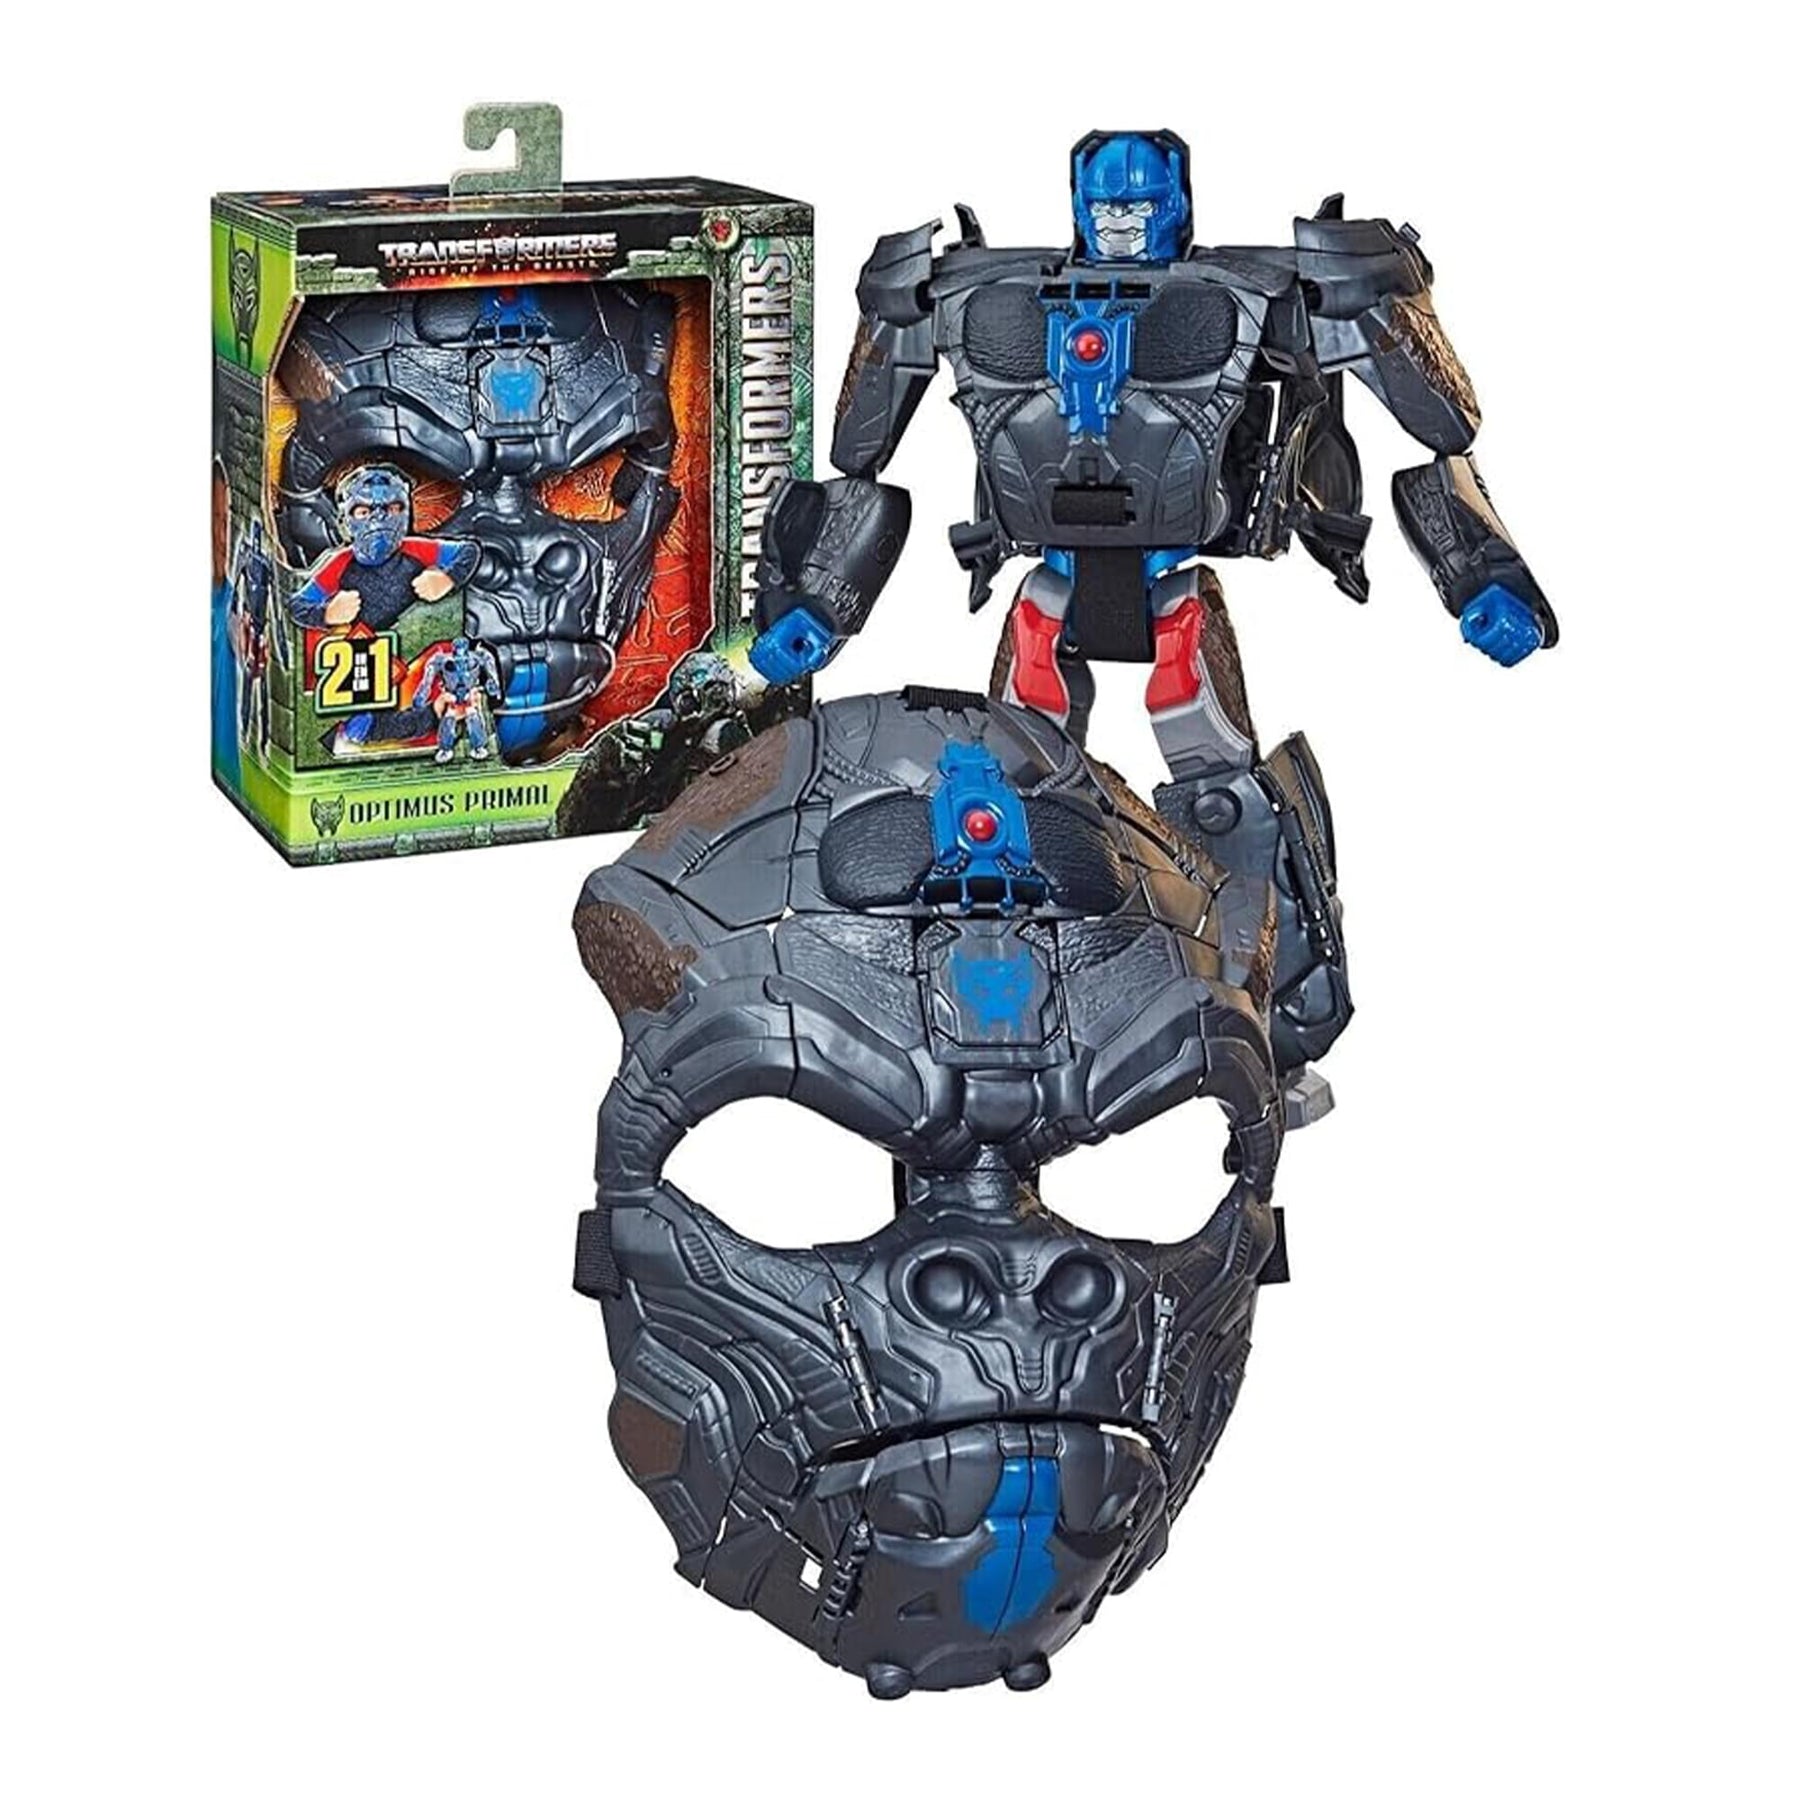 Transformers: Rise of the Beasts 2-in-1 Optimus Primal Role Play Mask